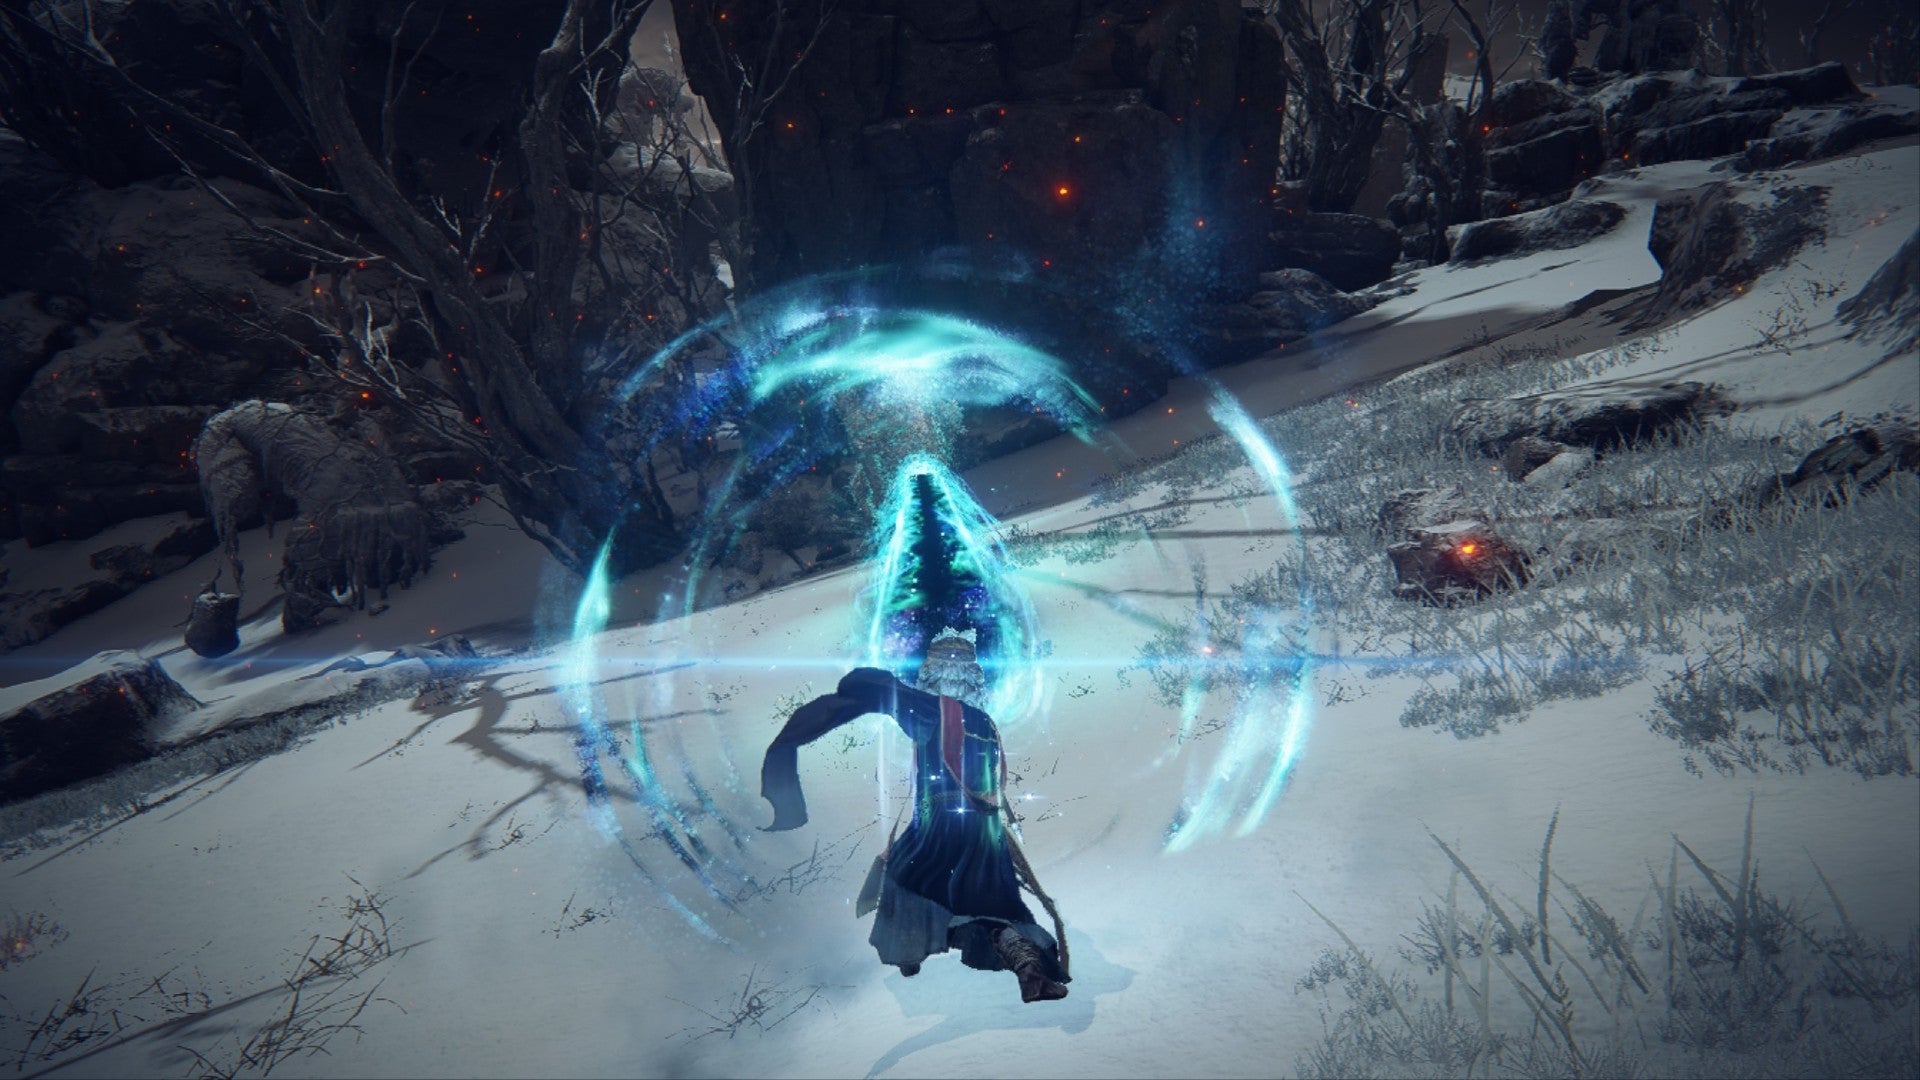 Elden Ring player using Comet Azur to send a surge of blue magical energy towards a troll in a snowy field